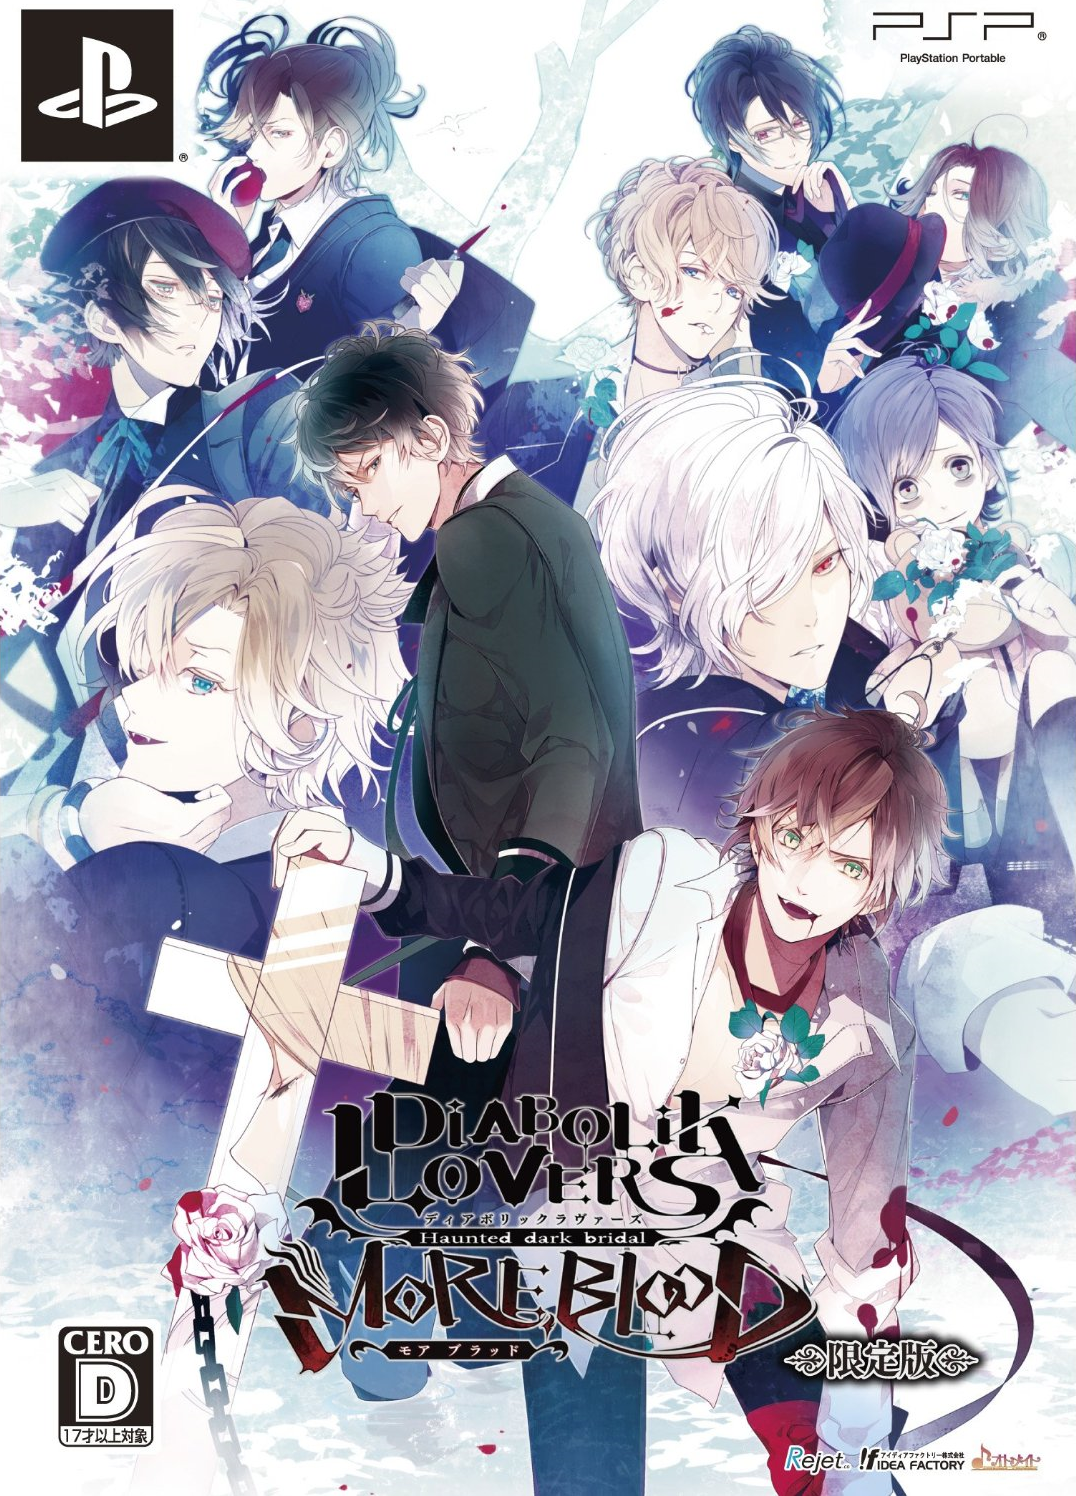 diabolik lovers game for android